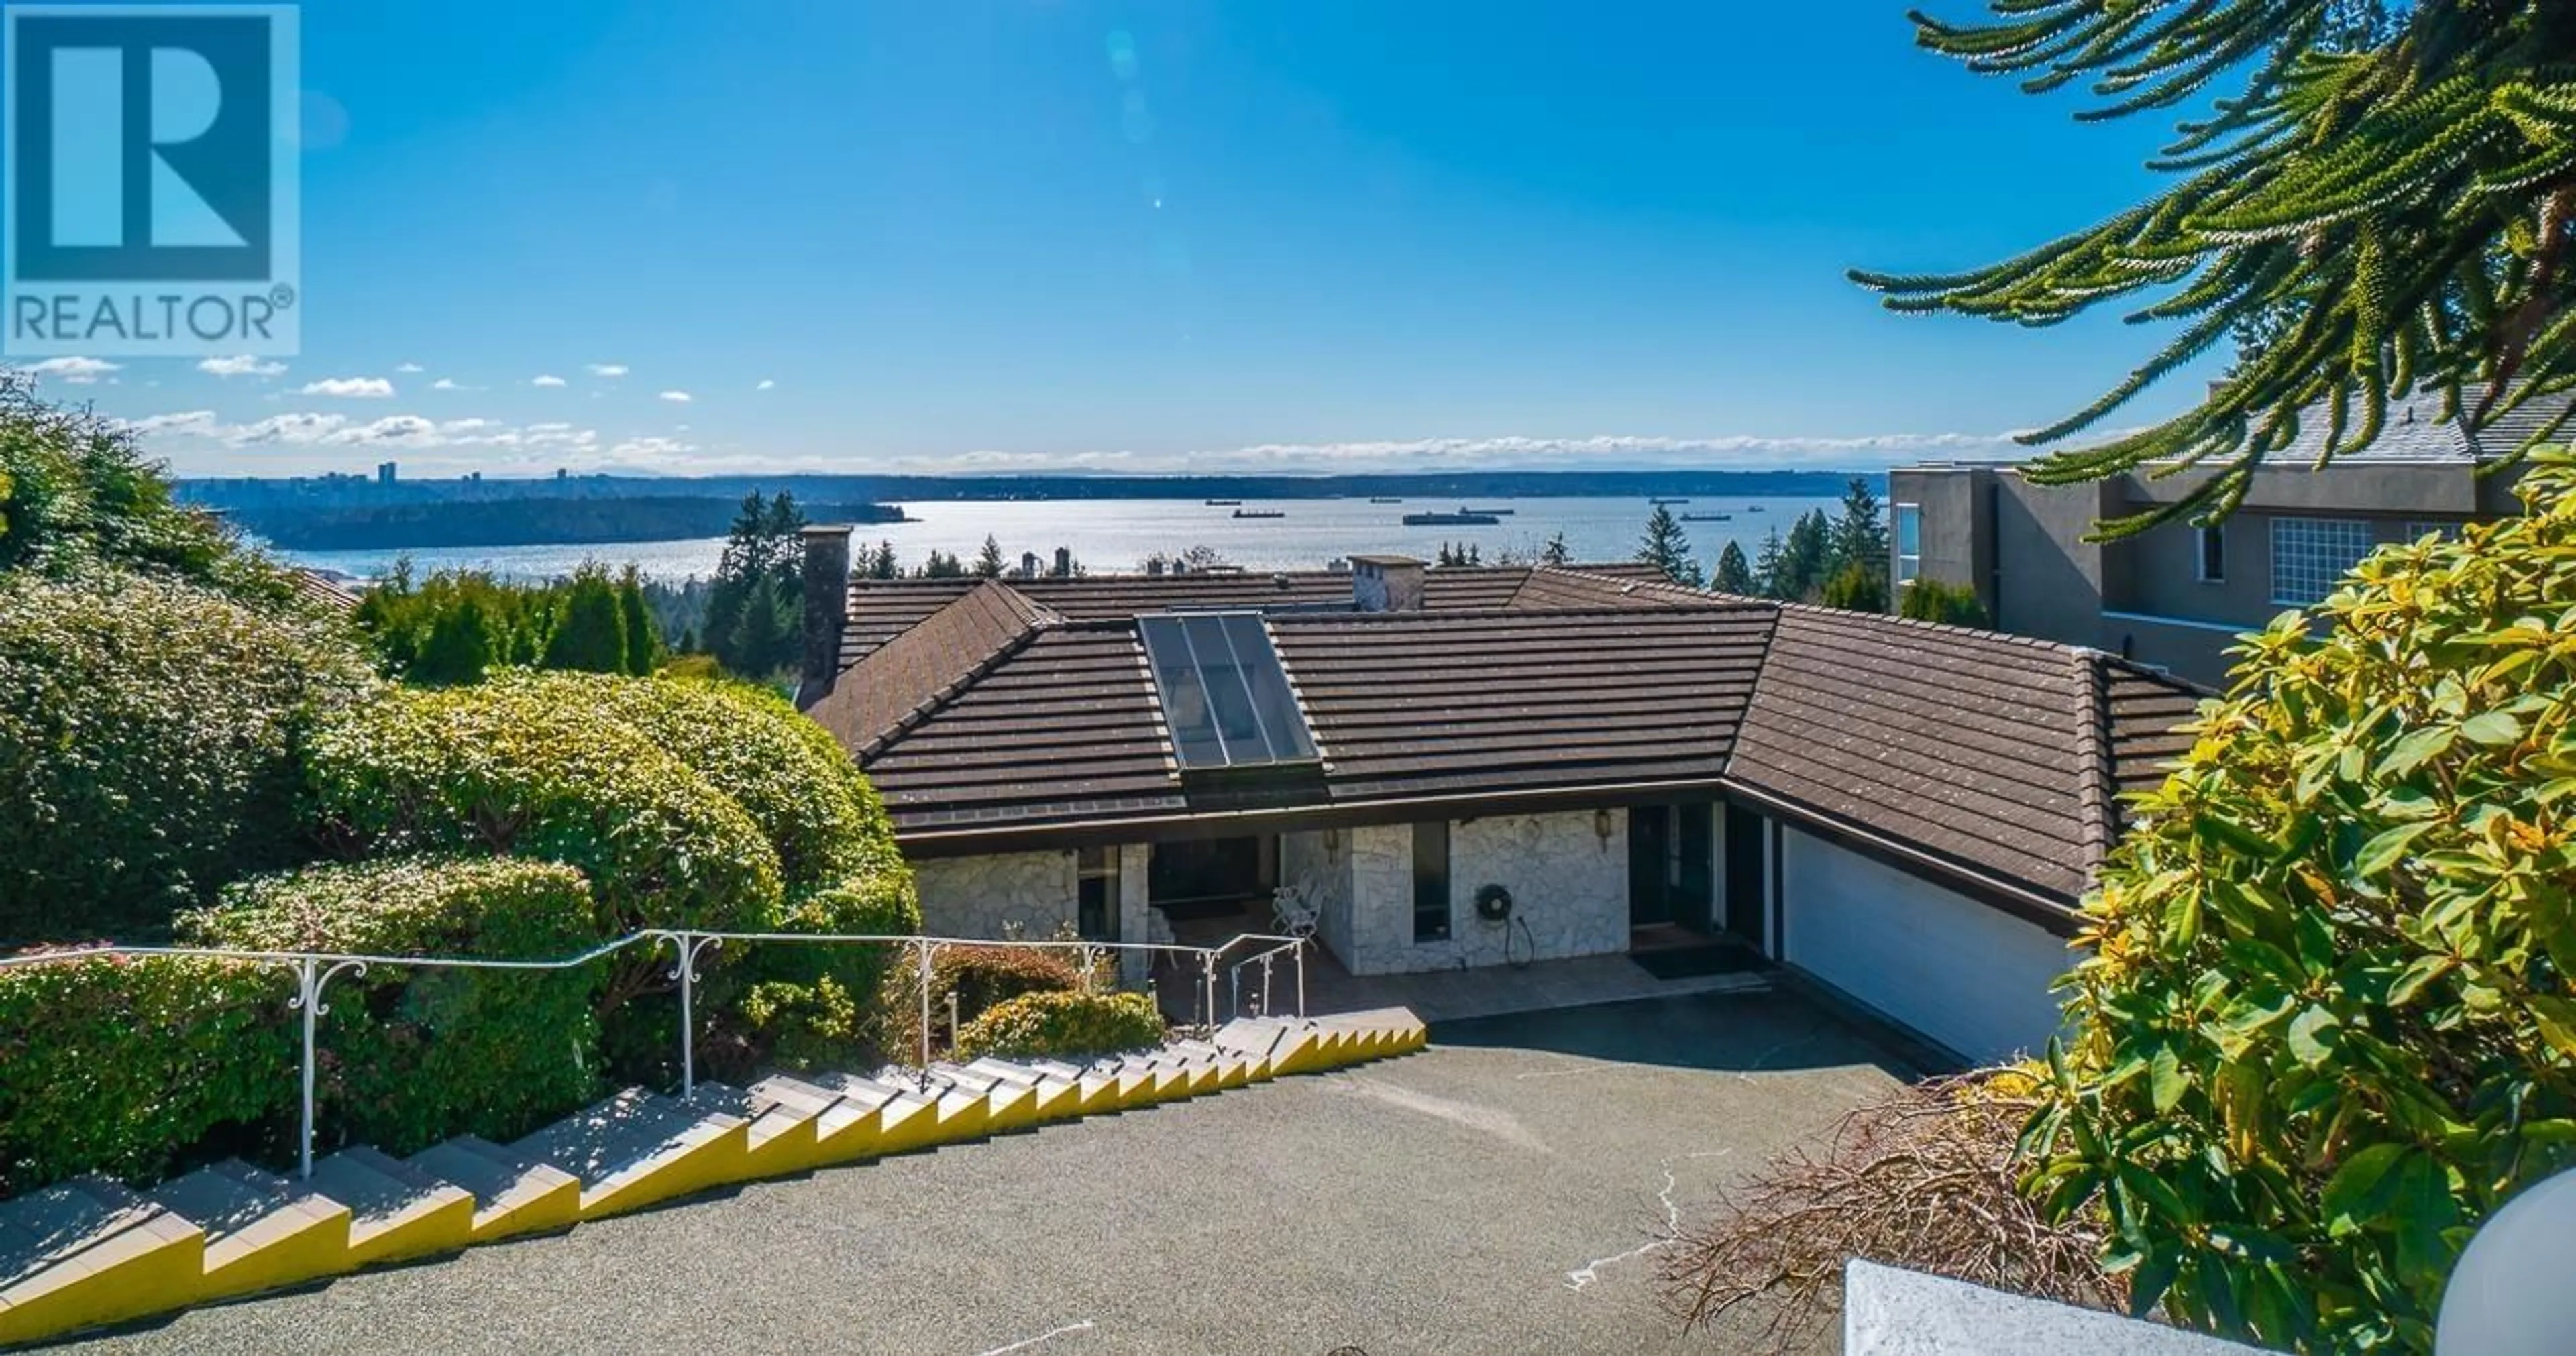 Lakeview for 2289 WESTHILL DRIVE, West Vancouver British Columbia V7S2Z2